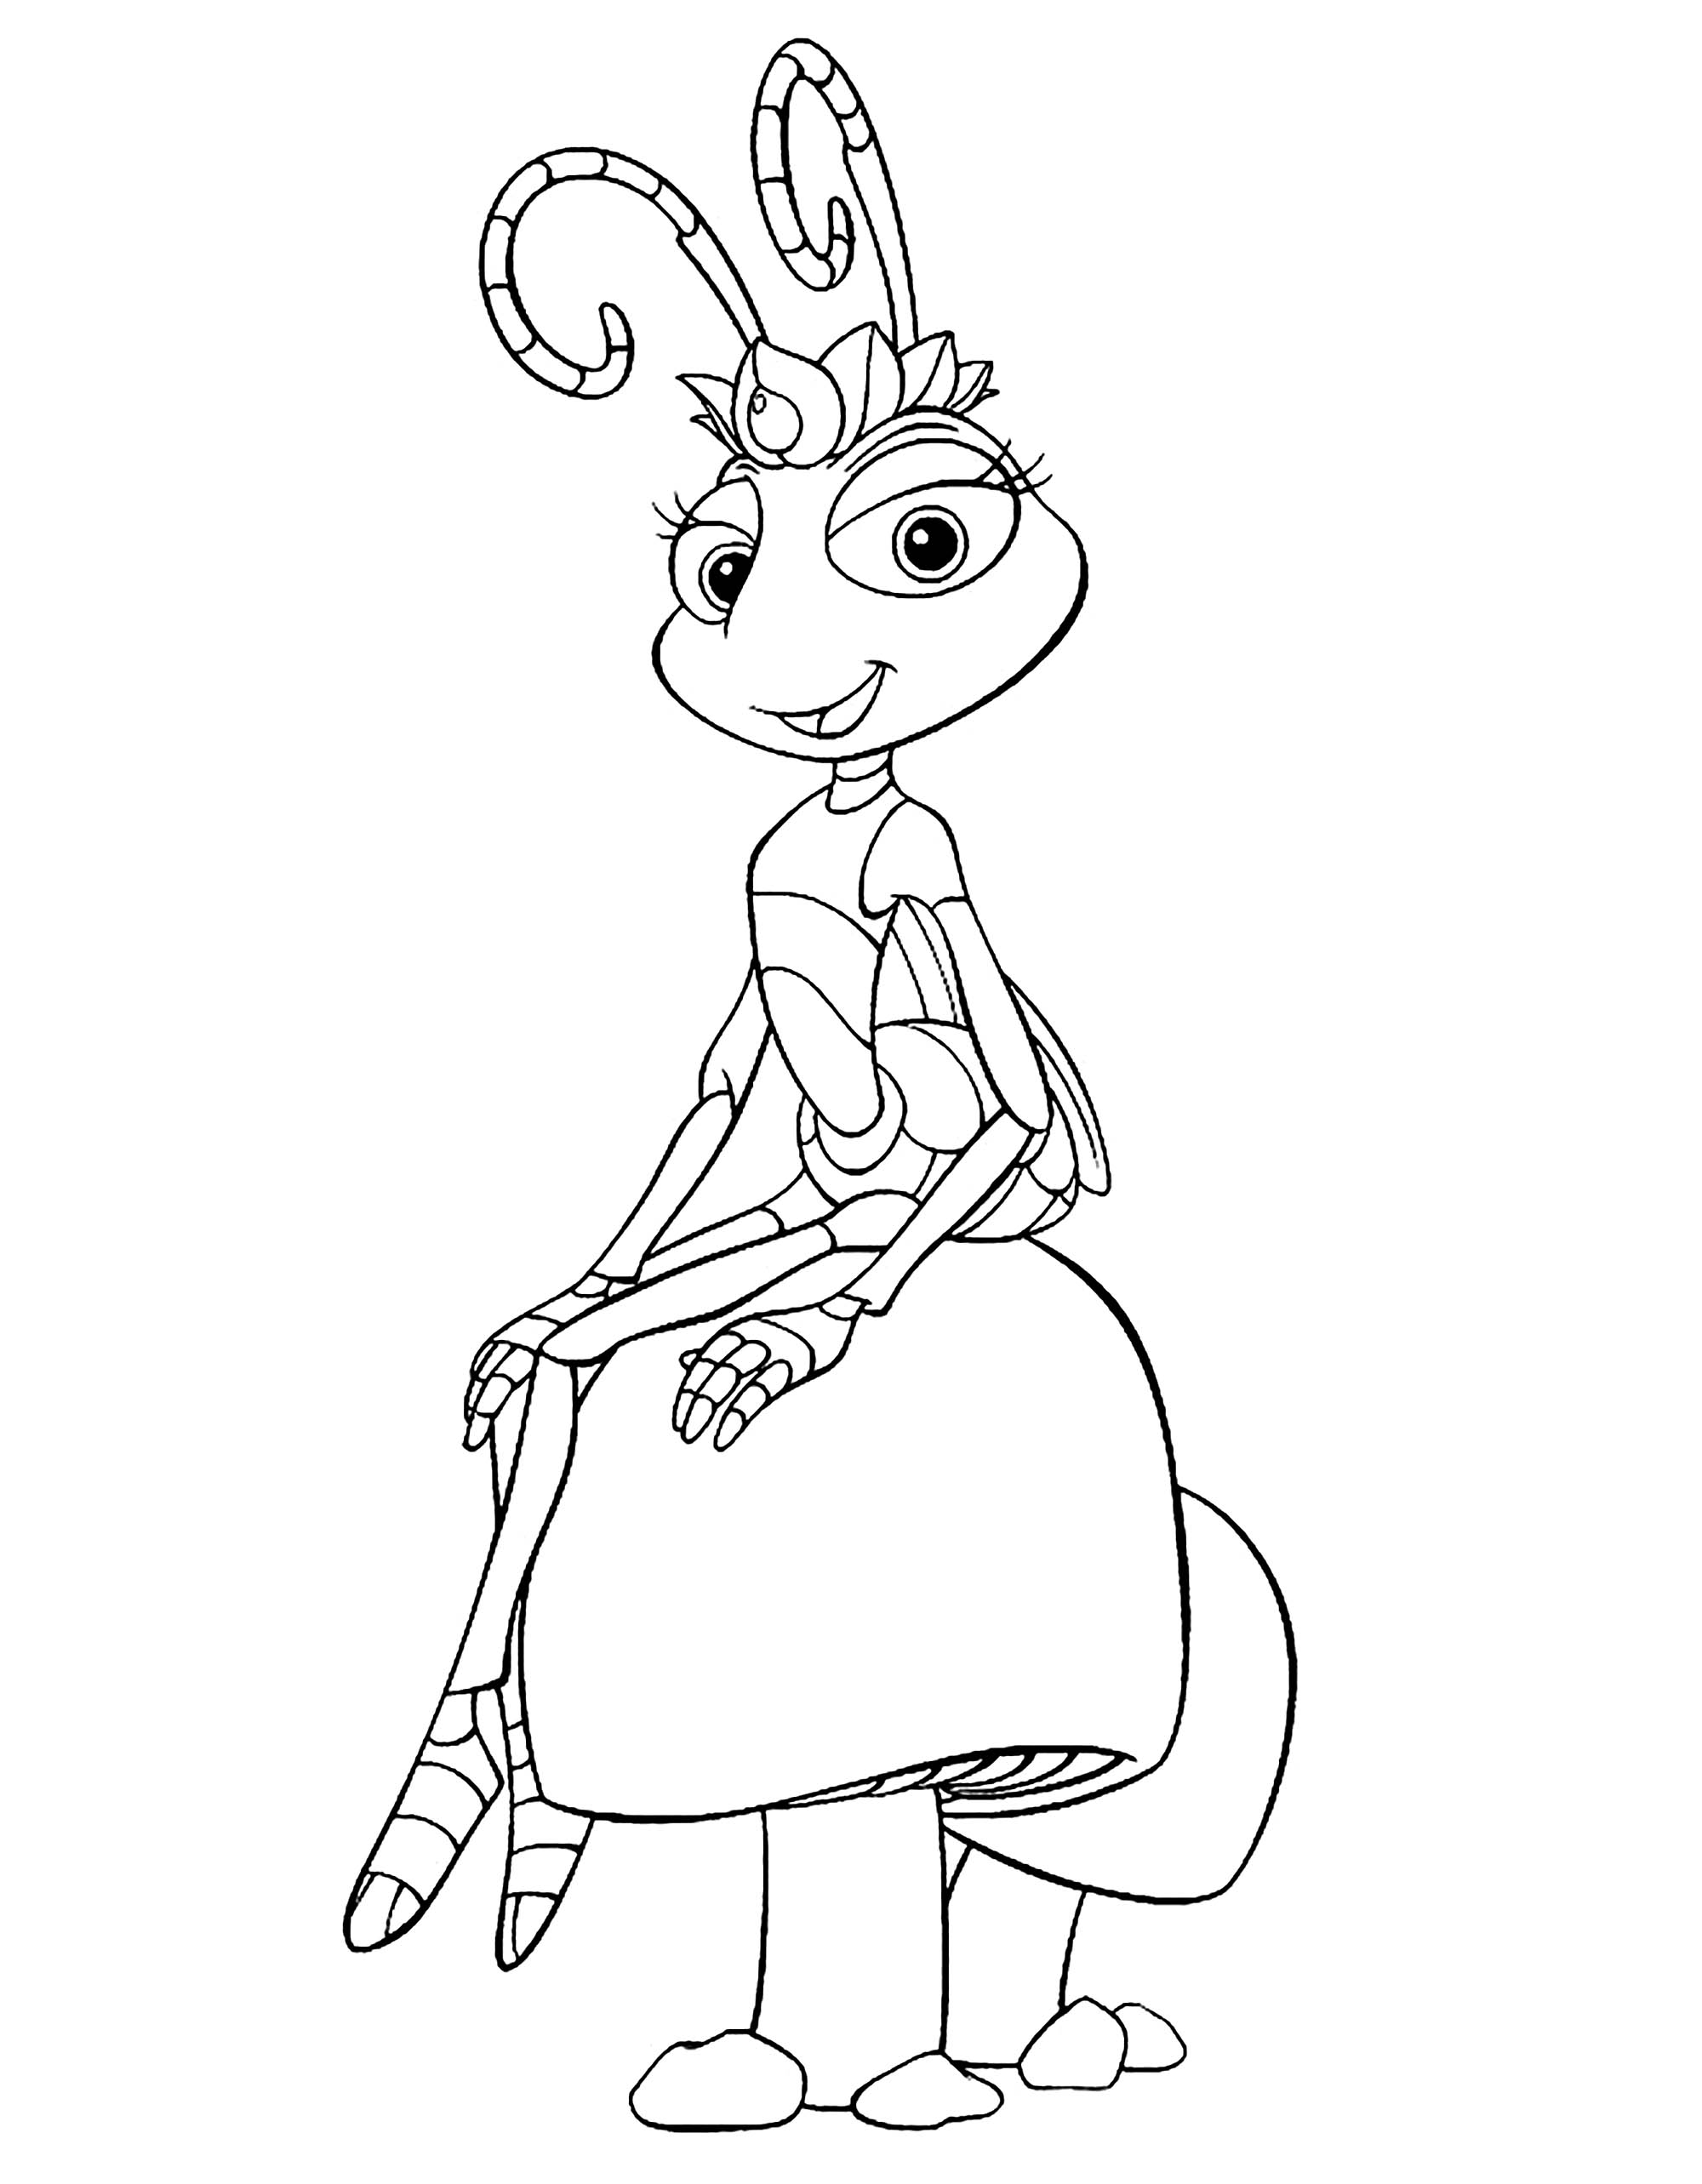 This princess from 1001 paws is waiting on her mushroom for you to color her!